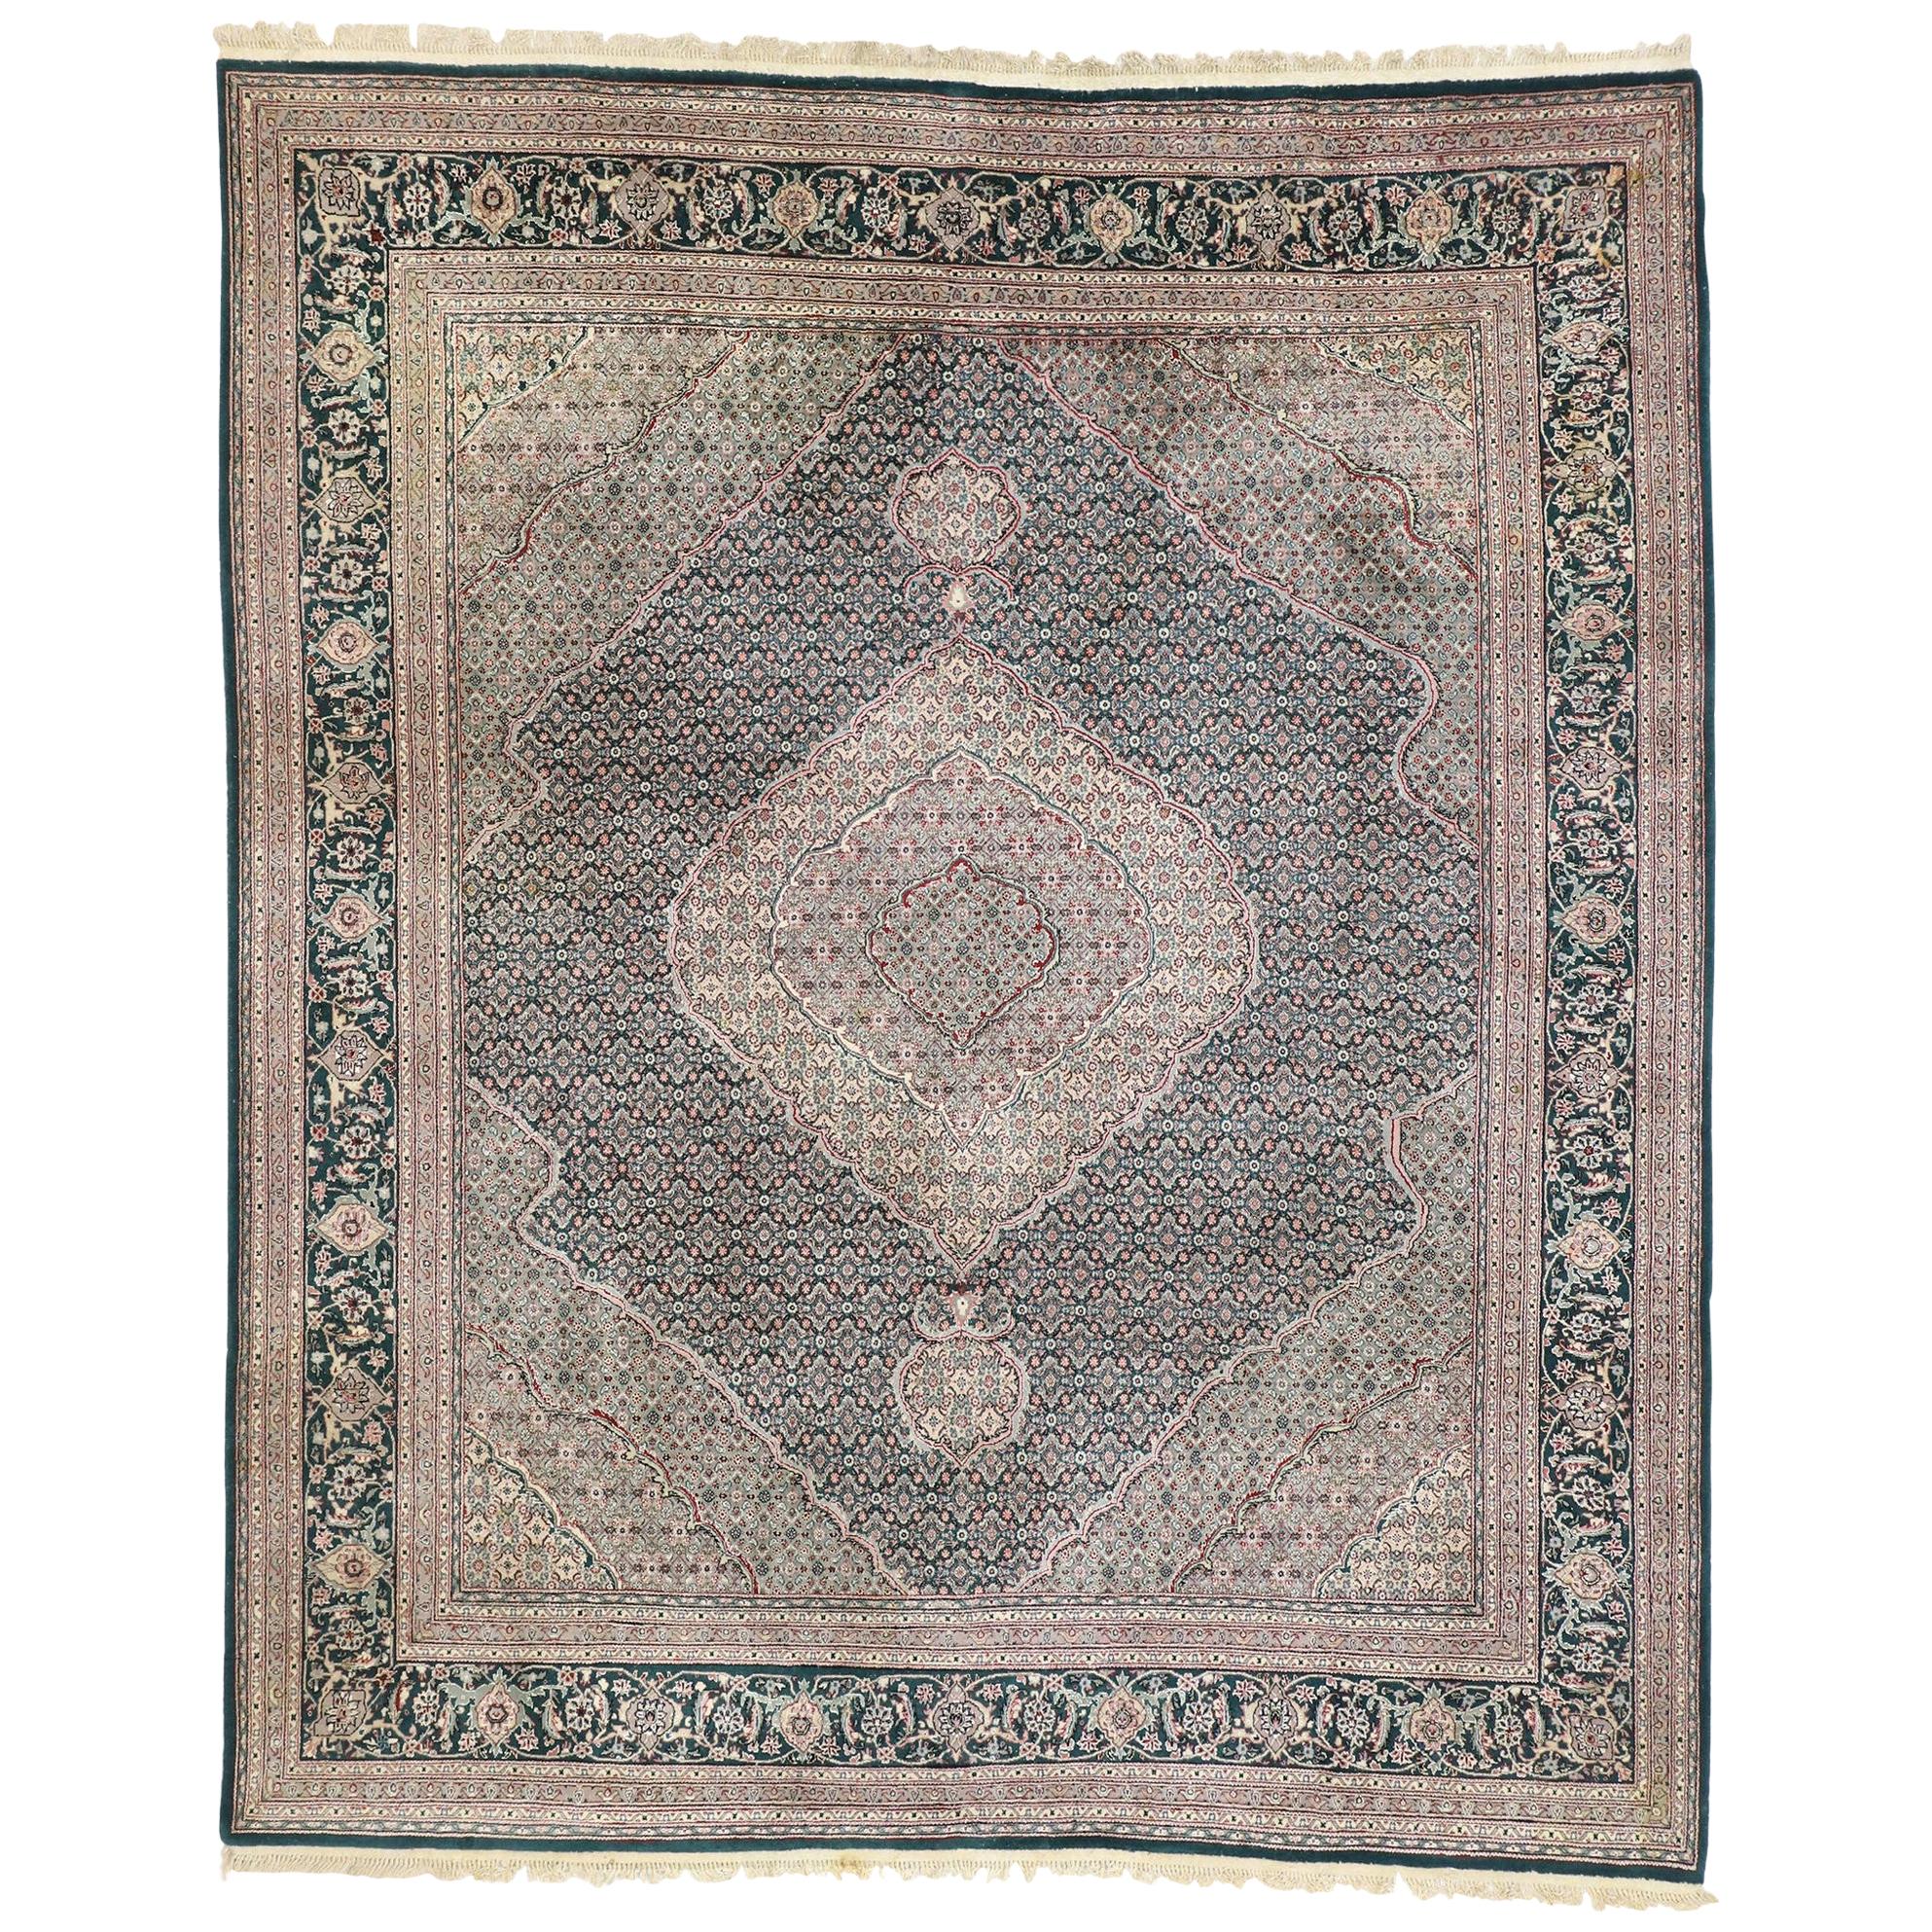 Vintage Chinese Persian Tabriz Rug with Mahi Fish Design and Old World Style